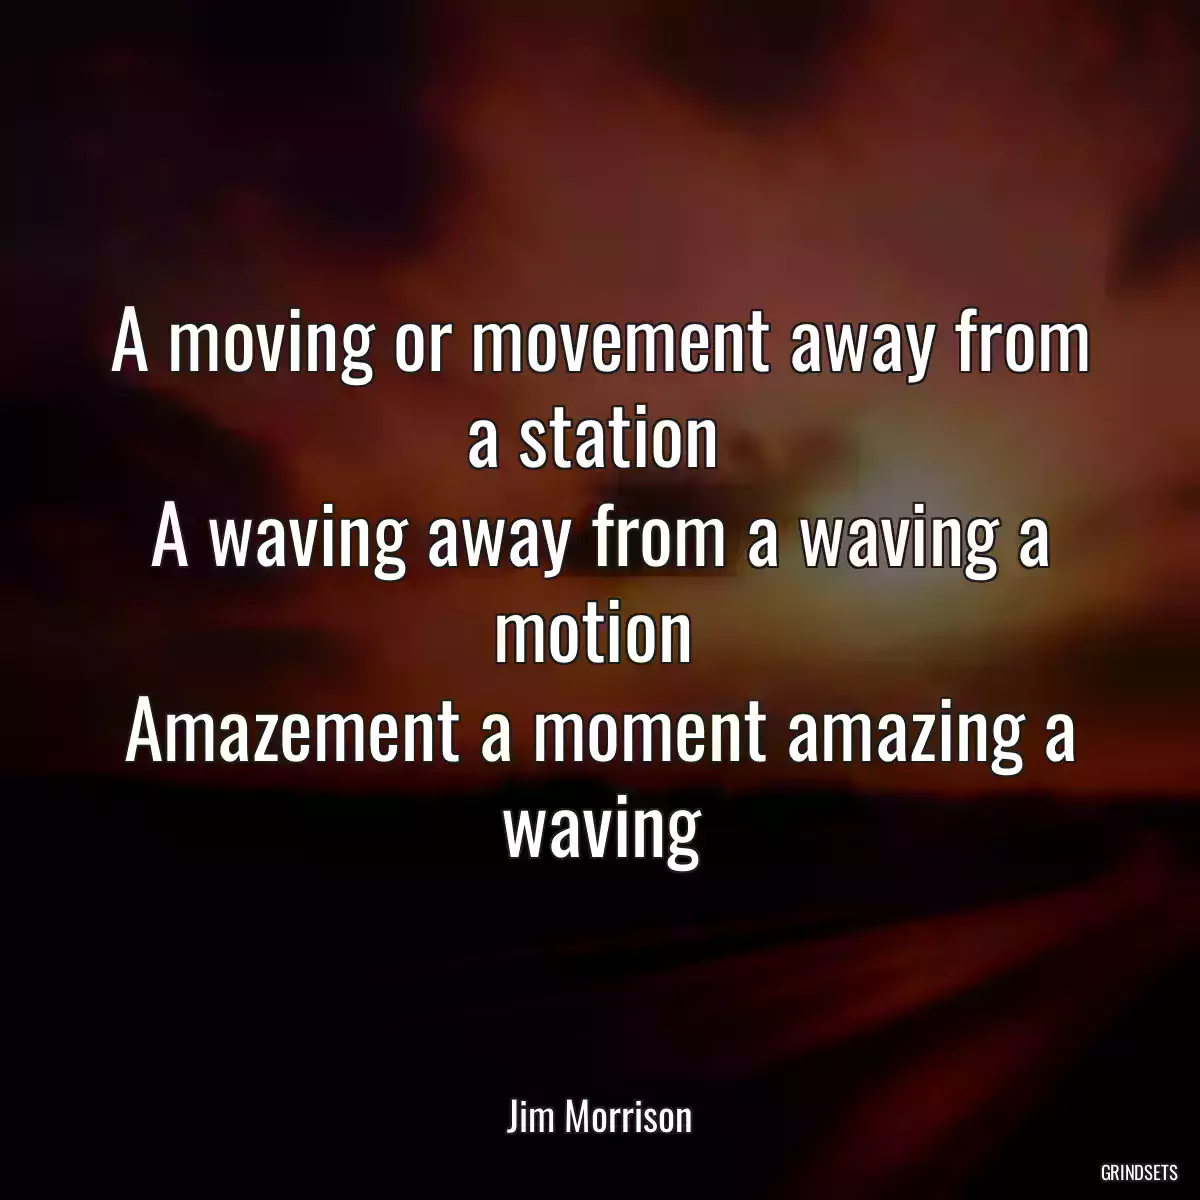 A moving or movement away from a station 
A waving away from a waving a motion 
Amazement a moment amazing a waving